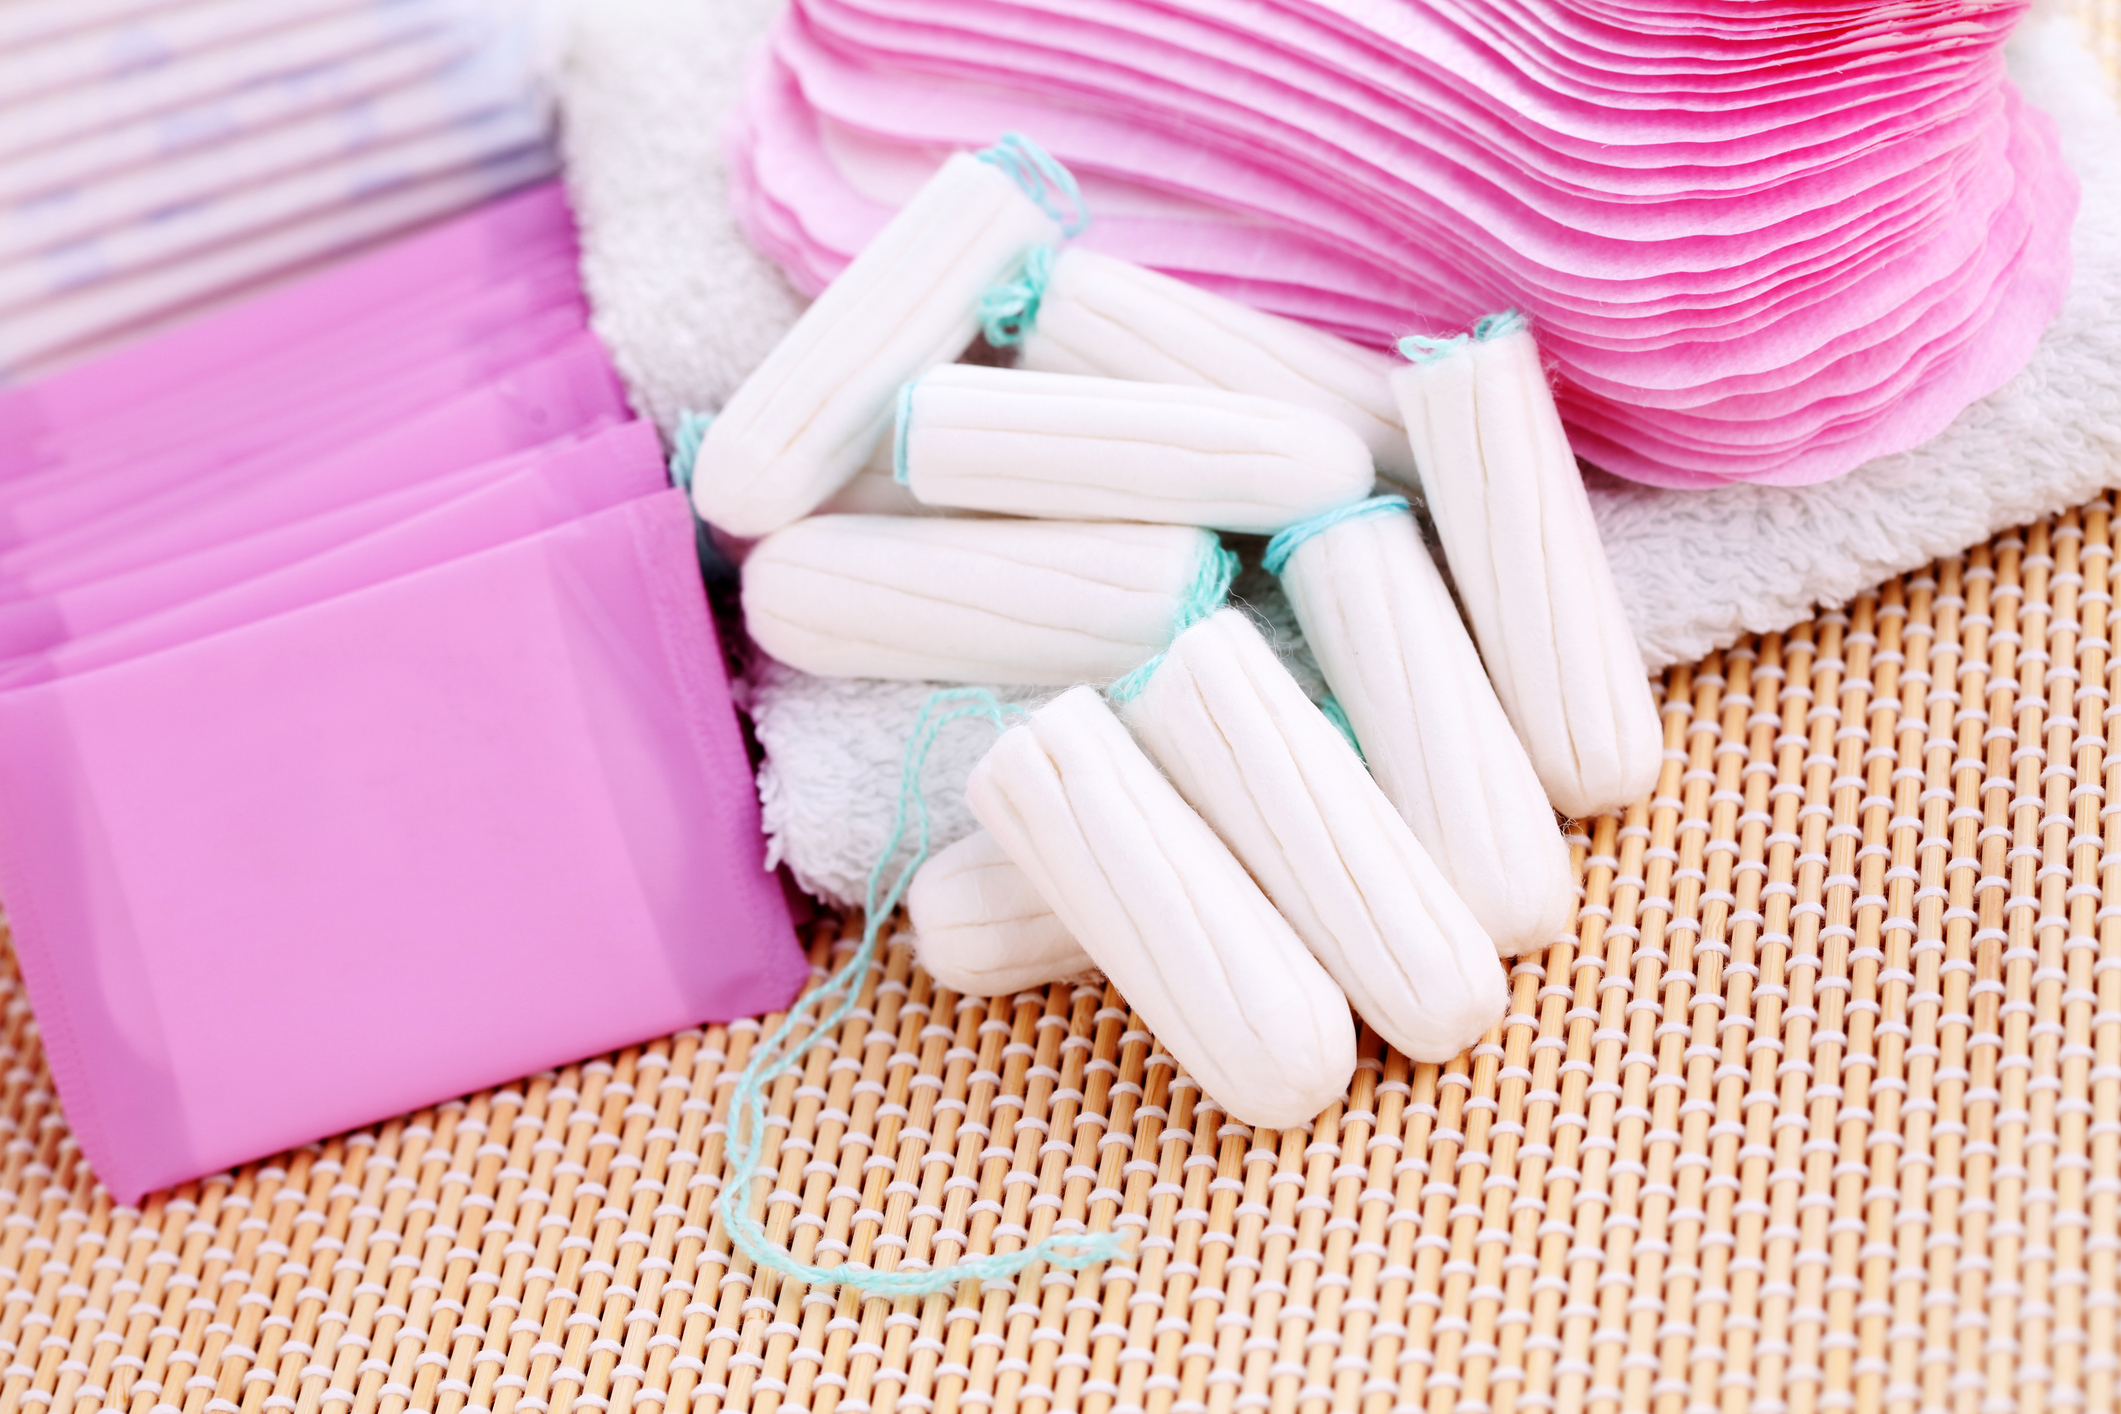 Pharmac rejects request to fund pads, tampons for Kiwi women